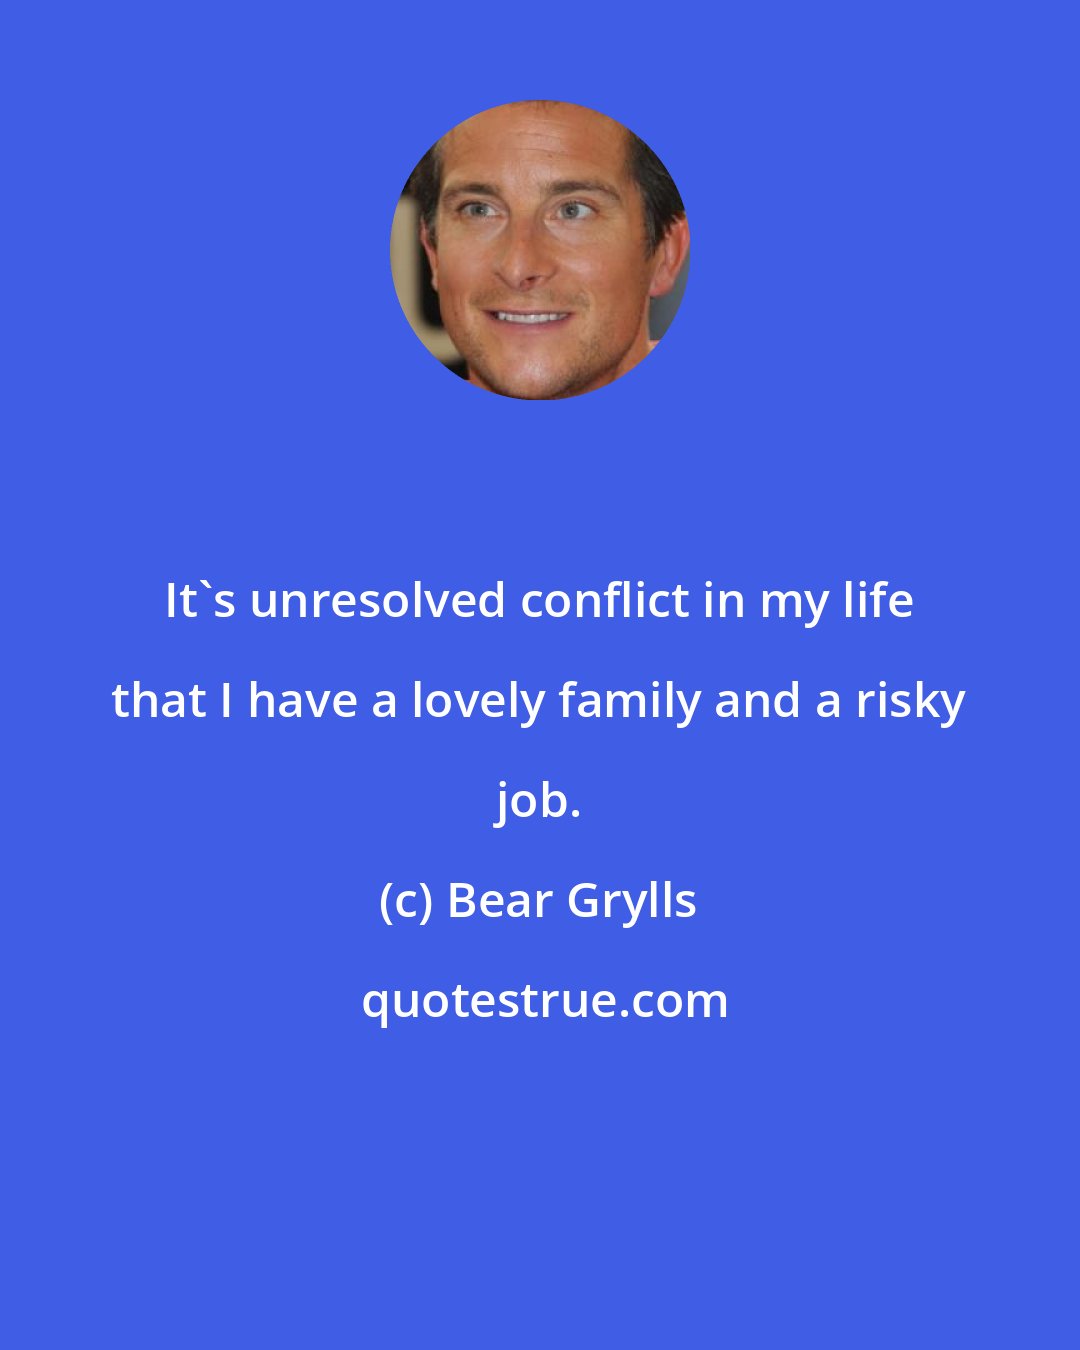 Bear Grylls: It's unresolved conflict in my life that I have a lovely family and a risky job.